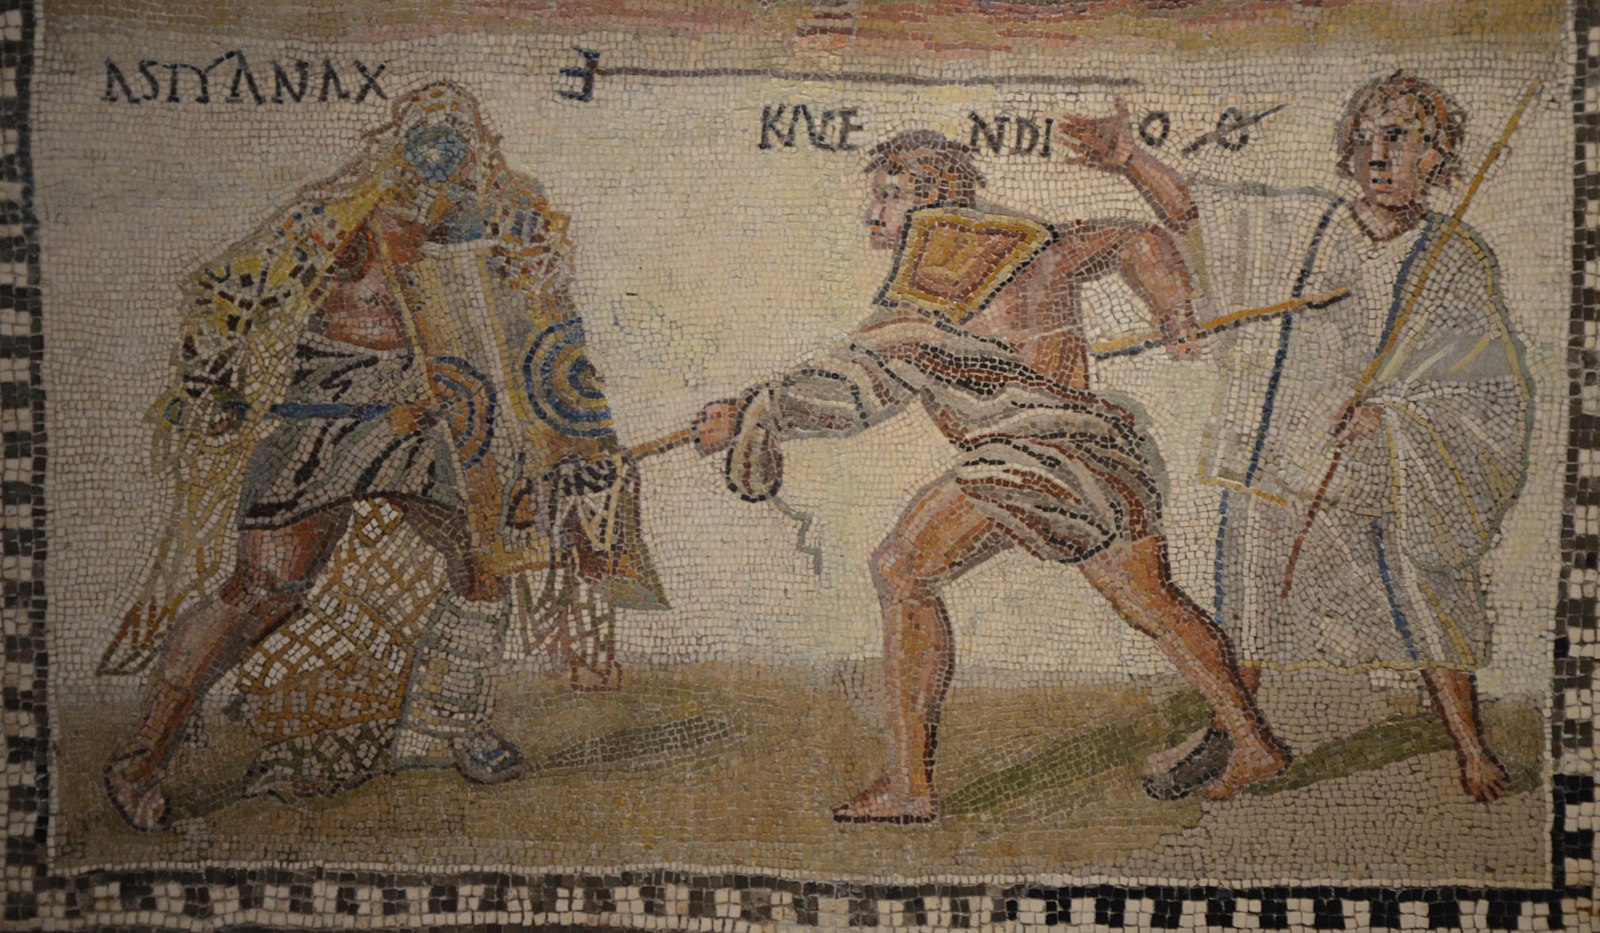 Mosaic_showing_a_retiarius_(net-fighter)_named_Kalendio_fighting_a_secutor_named_Astyanax,_3rd...jpg